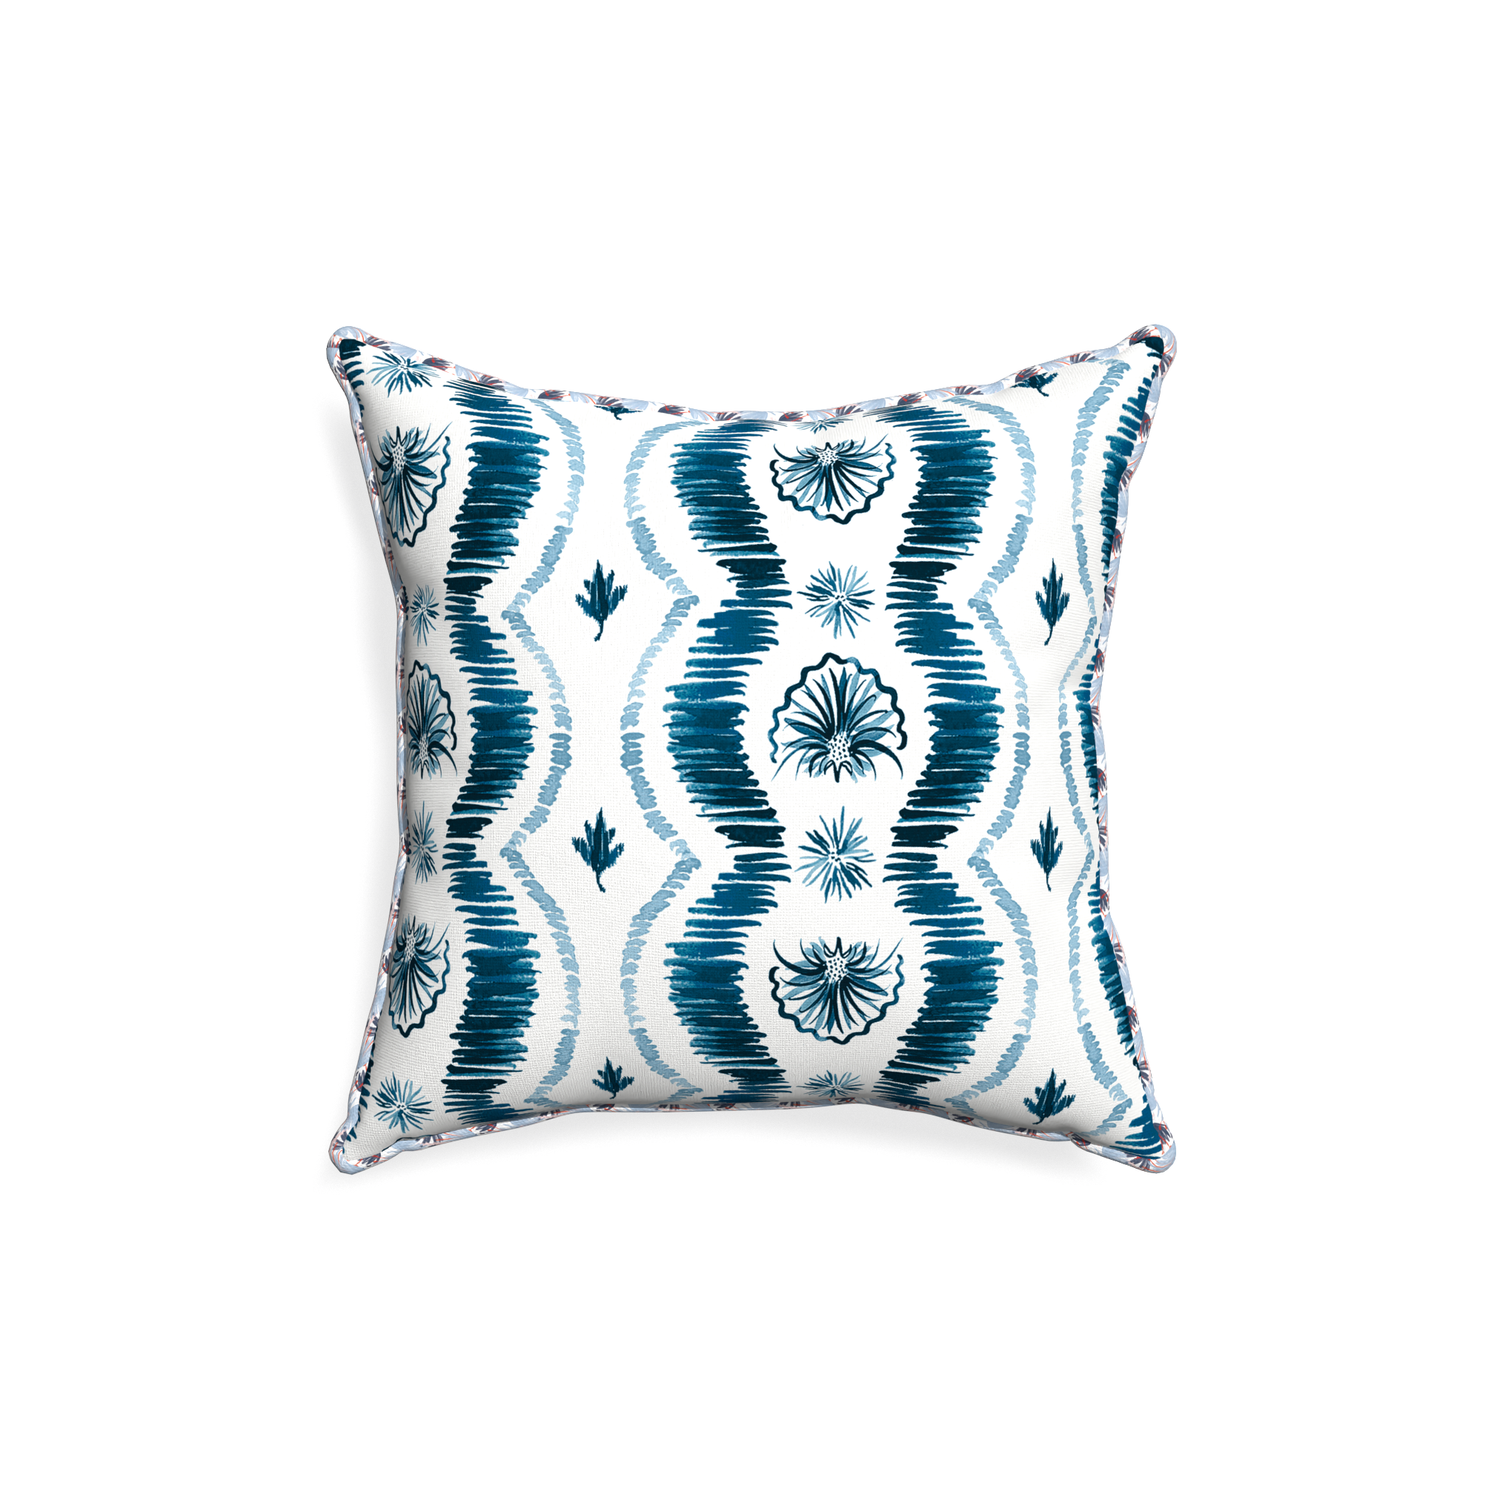 18-square alice custom blue ikatpillow with e piping on white background